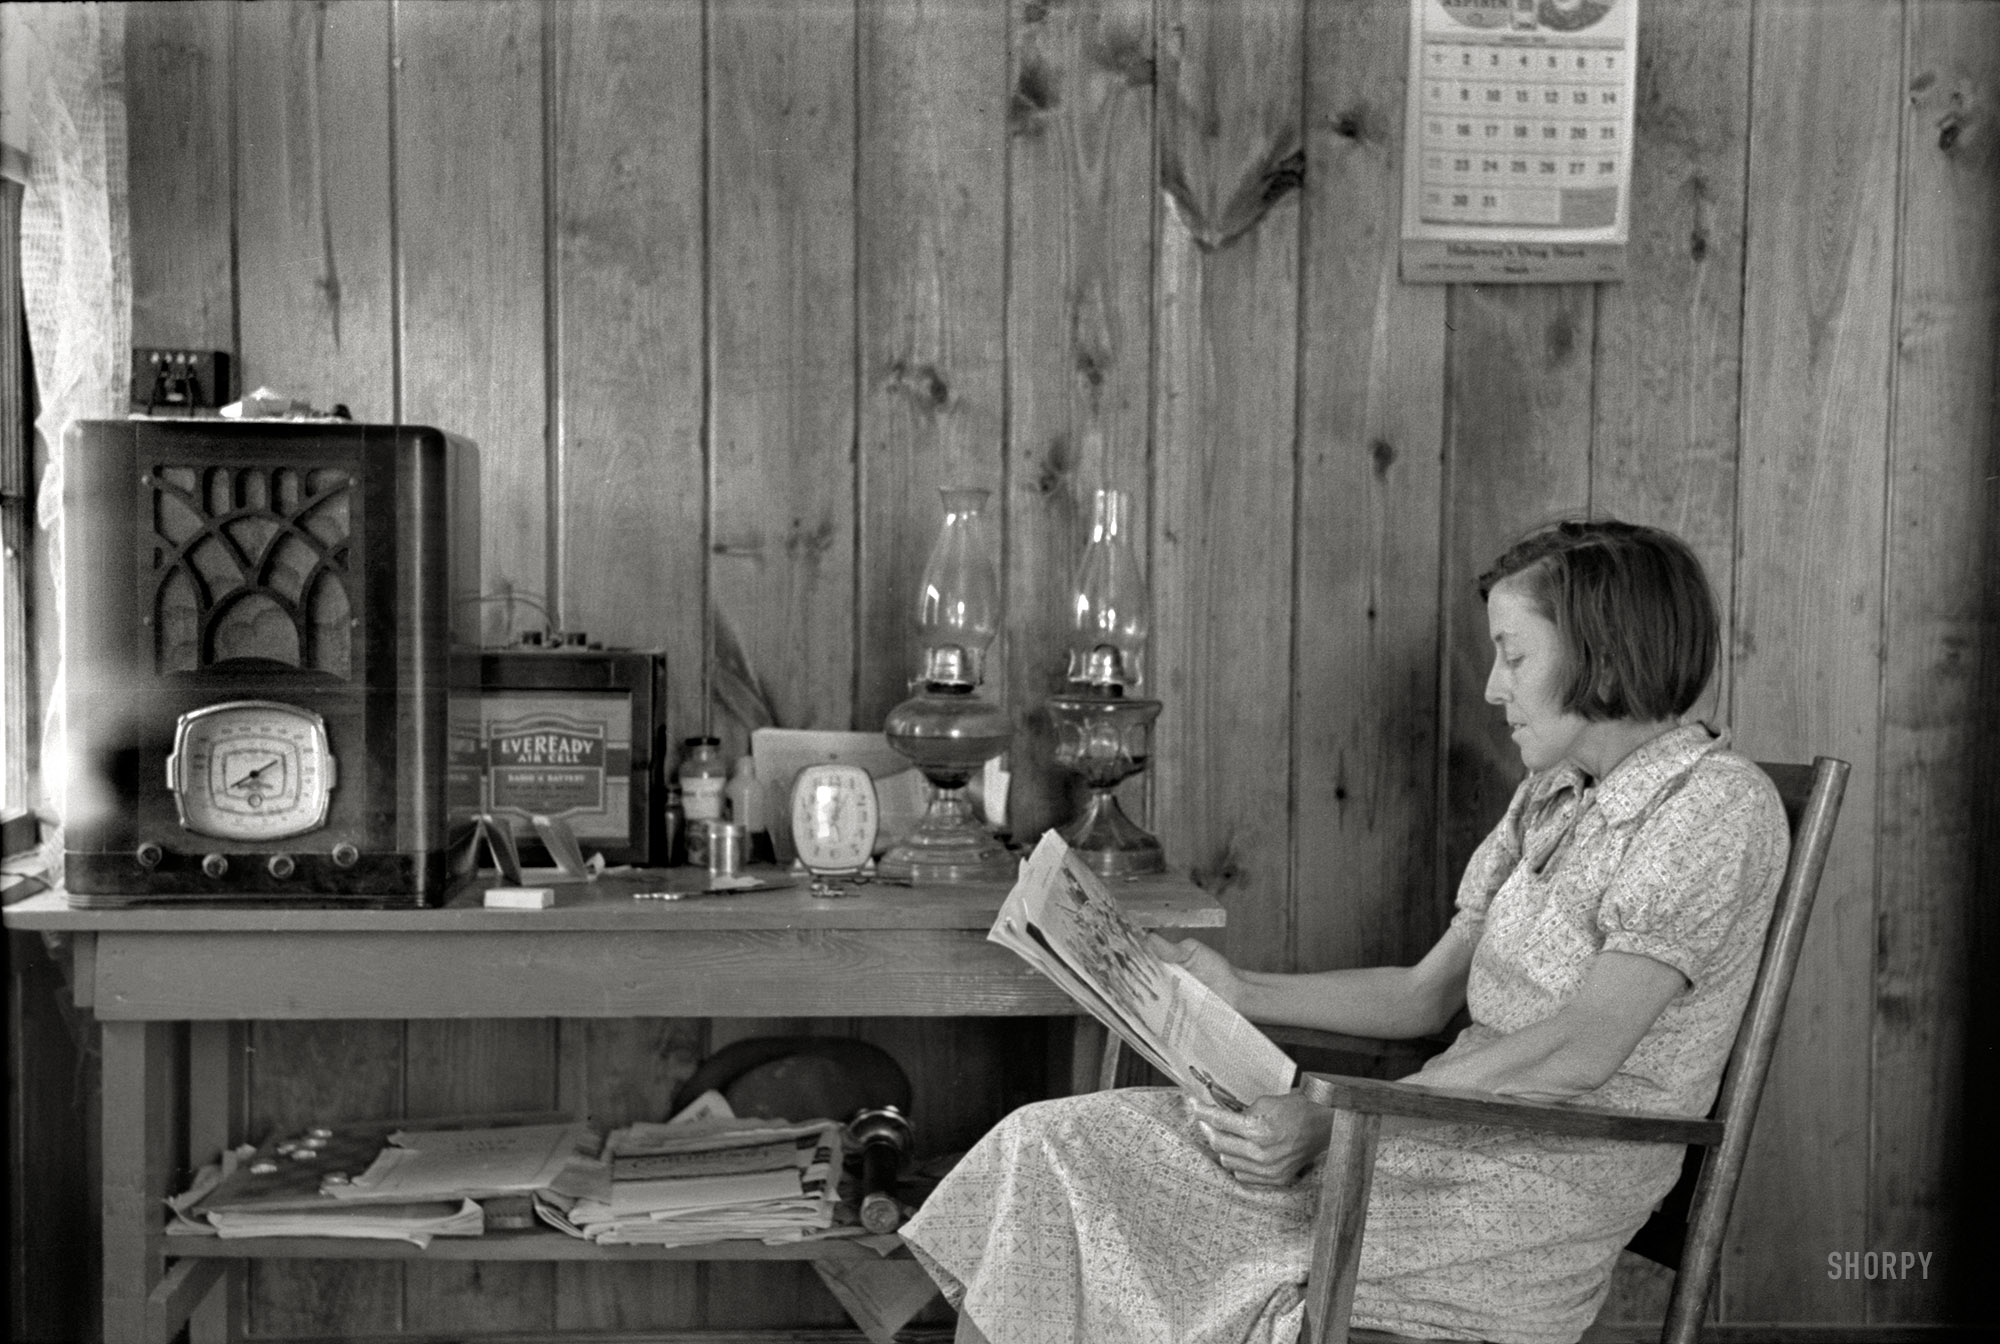 January 1939. "Housewife reading in living room. Chicot Farms, Arkansas." A peek behind the porch seen in the previous post. 35mm nitrate negative by Russell Lee for the Farm Security Administration. View full size.